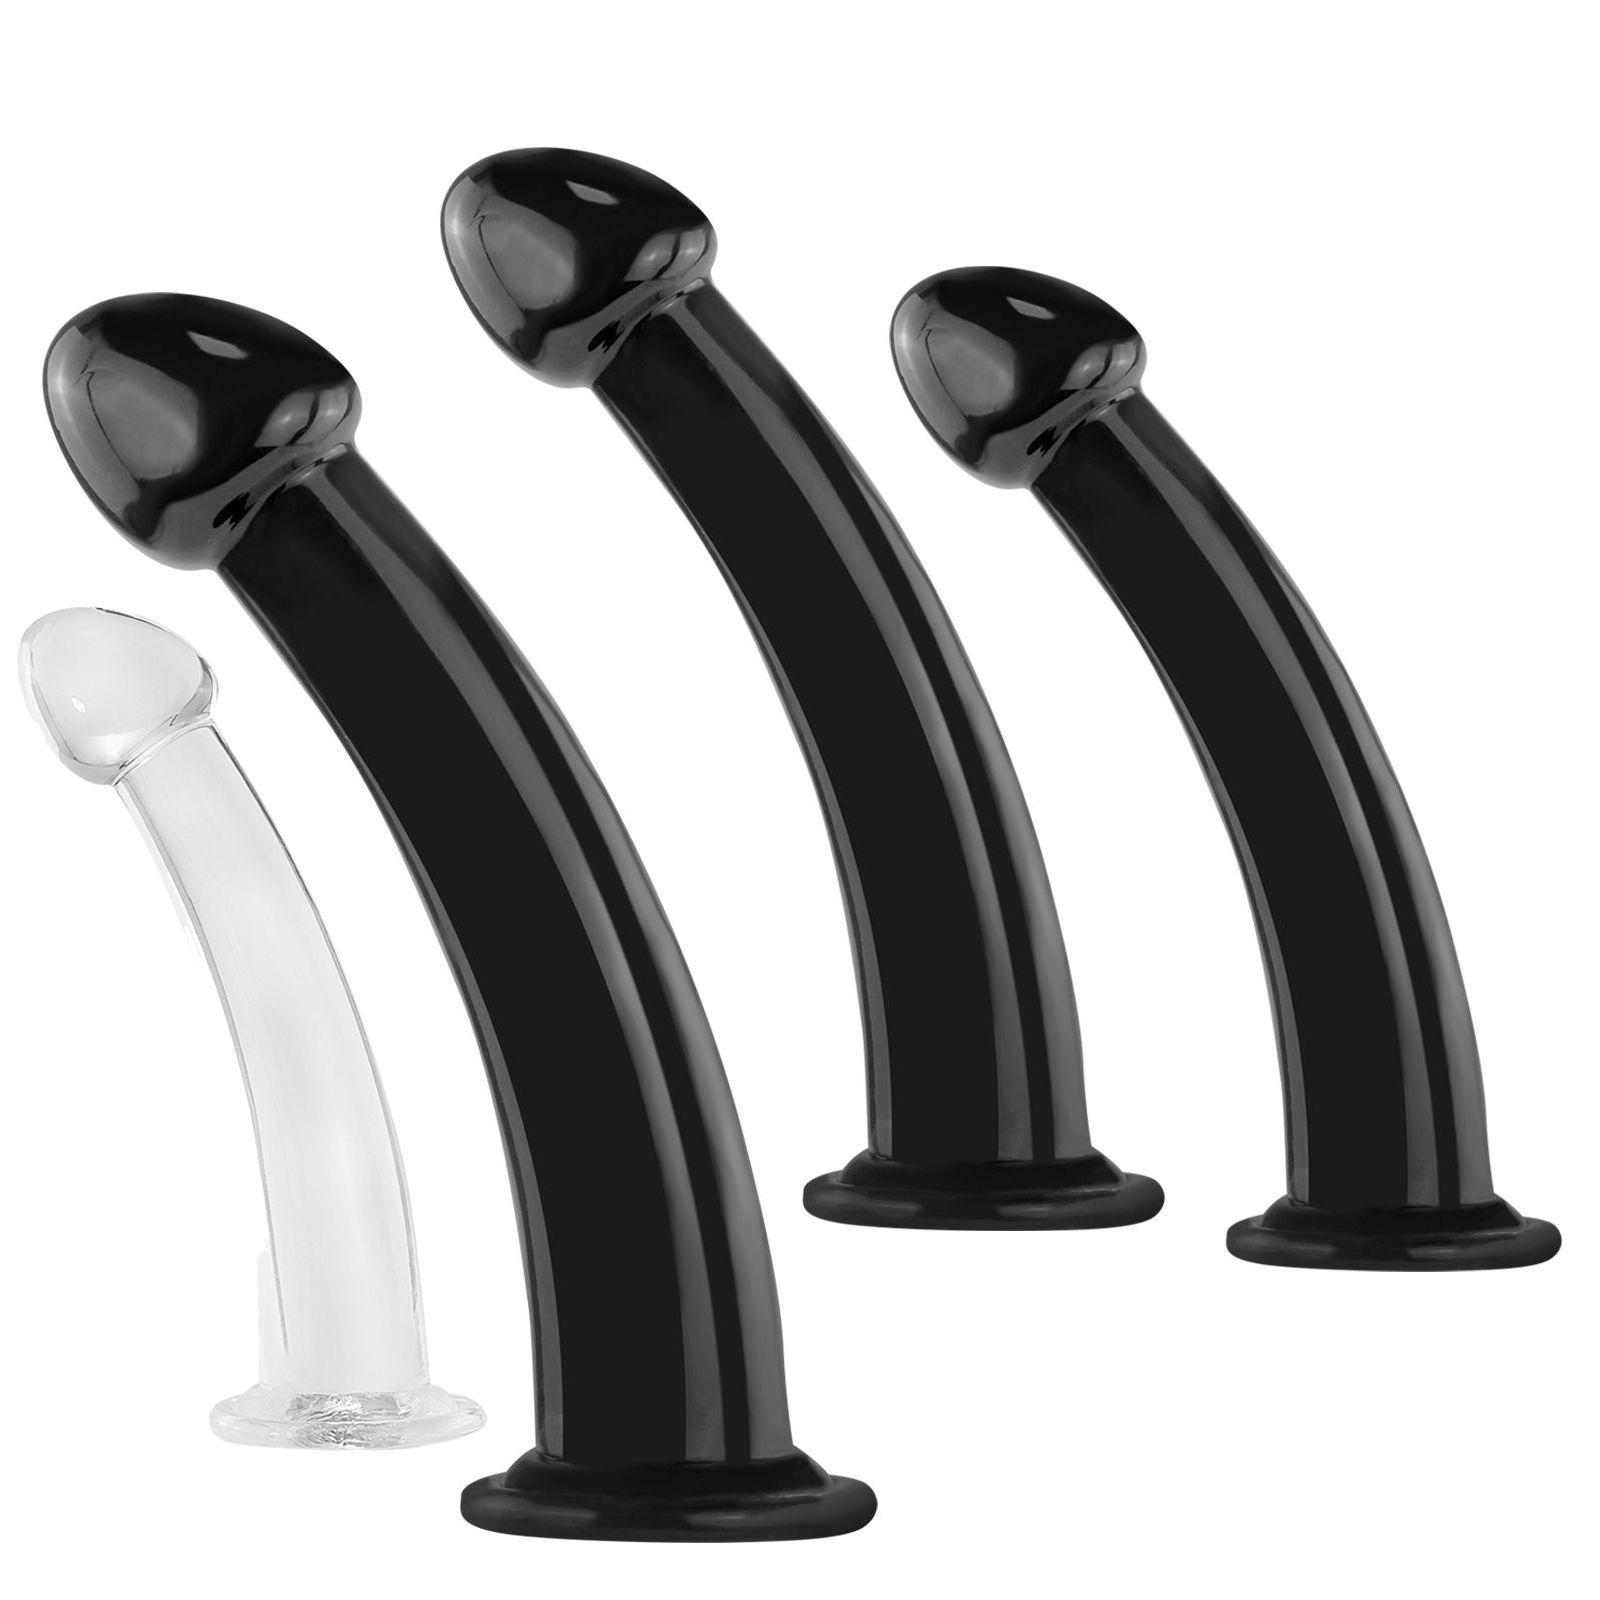 3in1/set S/m/l Smooth Big Head Dildos Anal Plug Set Butt Plugs Trainer Anus Intercourse Sexy Toy For Men Women Lesbian Couple